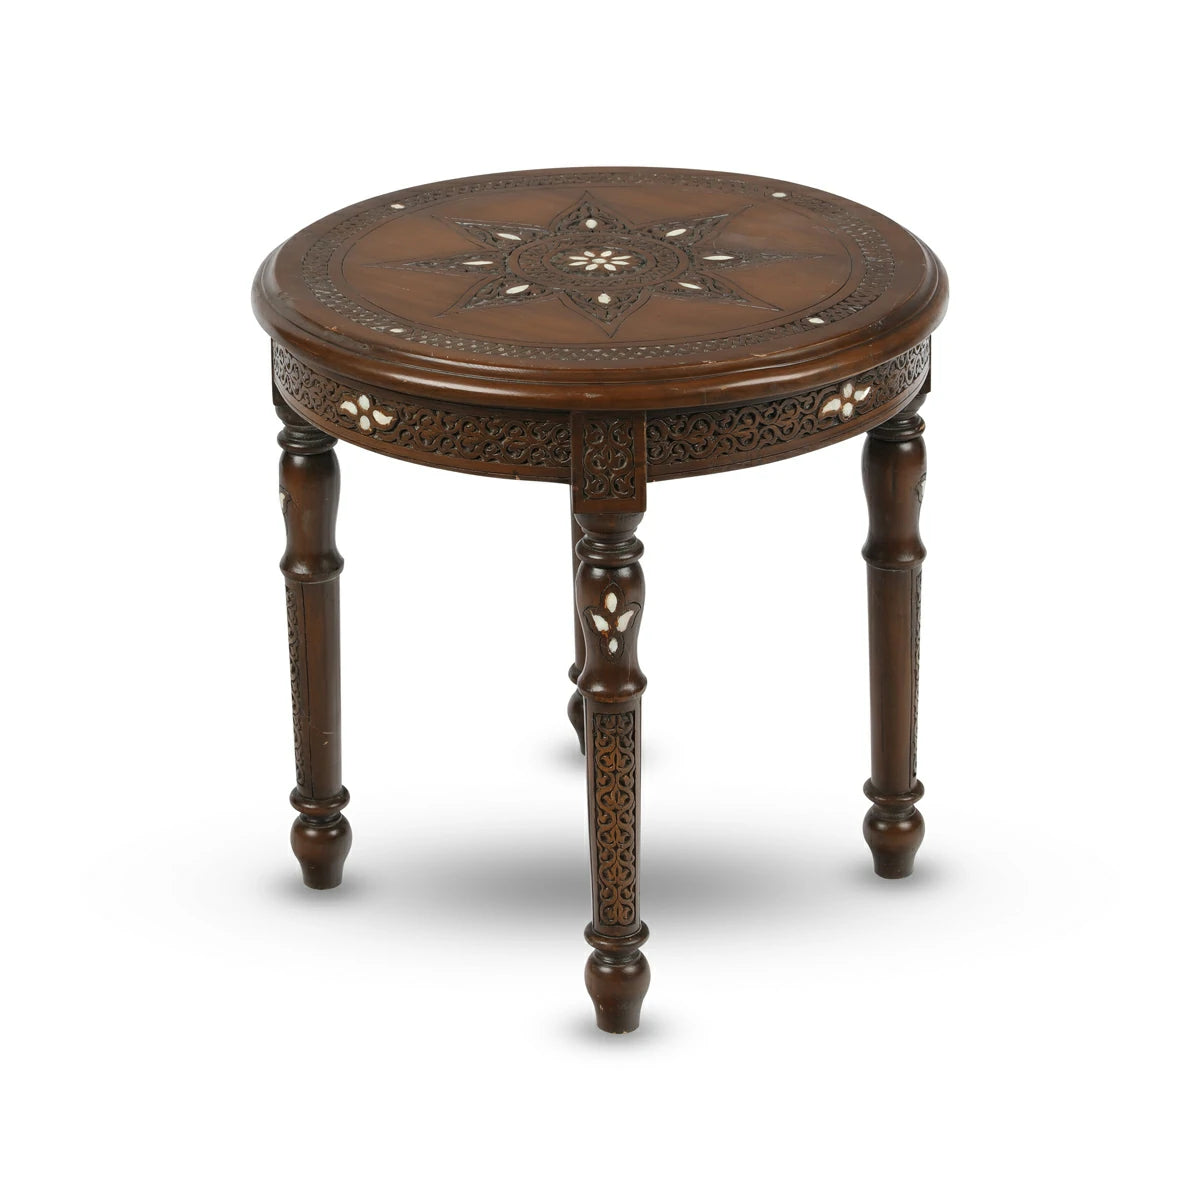 Antique Hand-carved & Mother of Pearl Inlaid Round Top Syrian Table